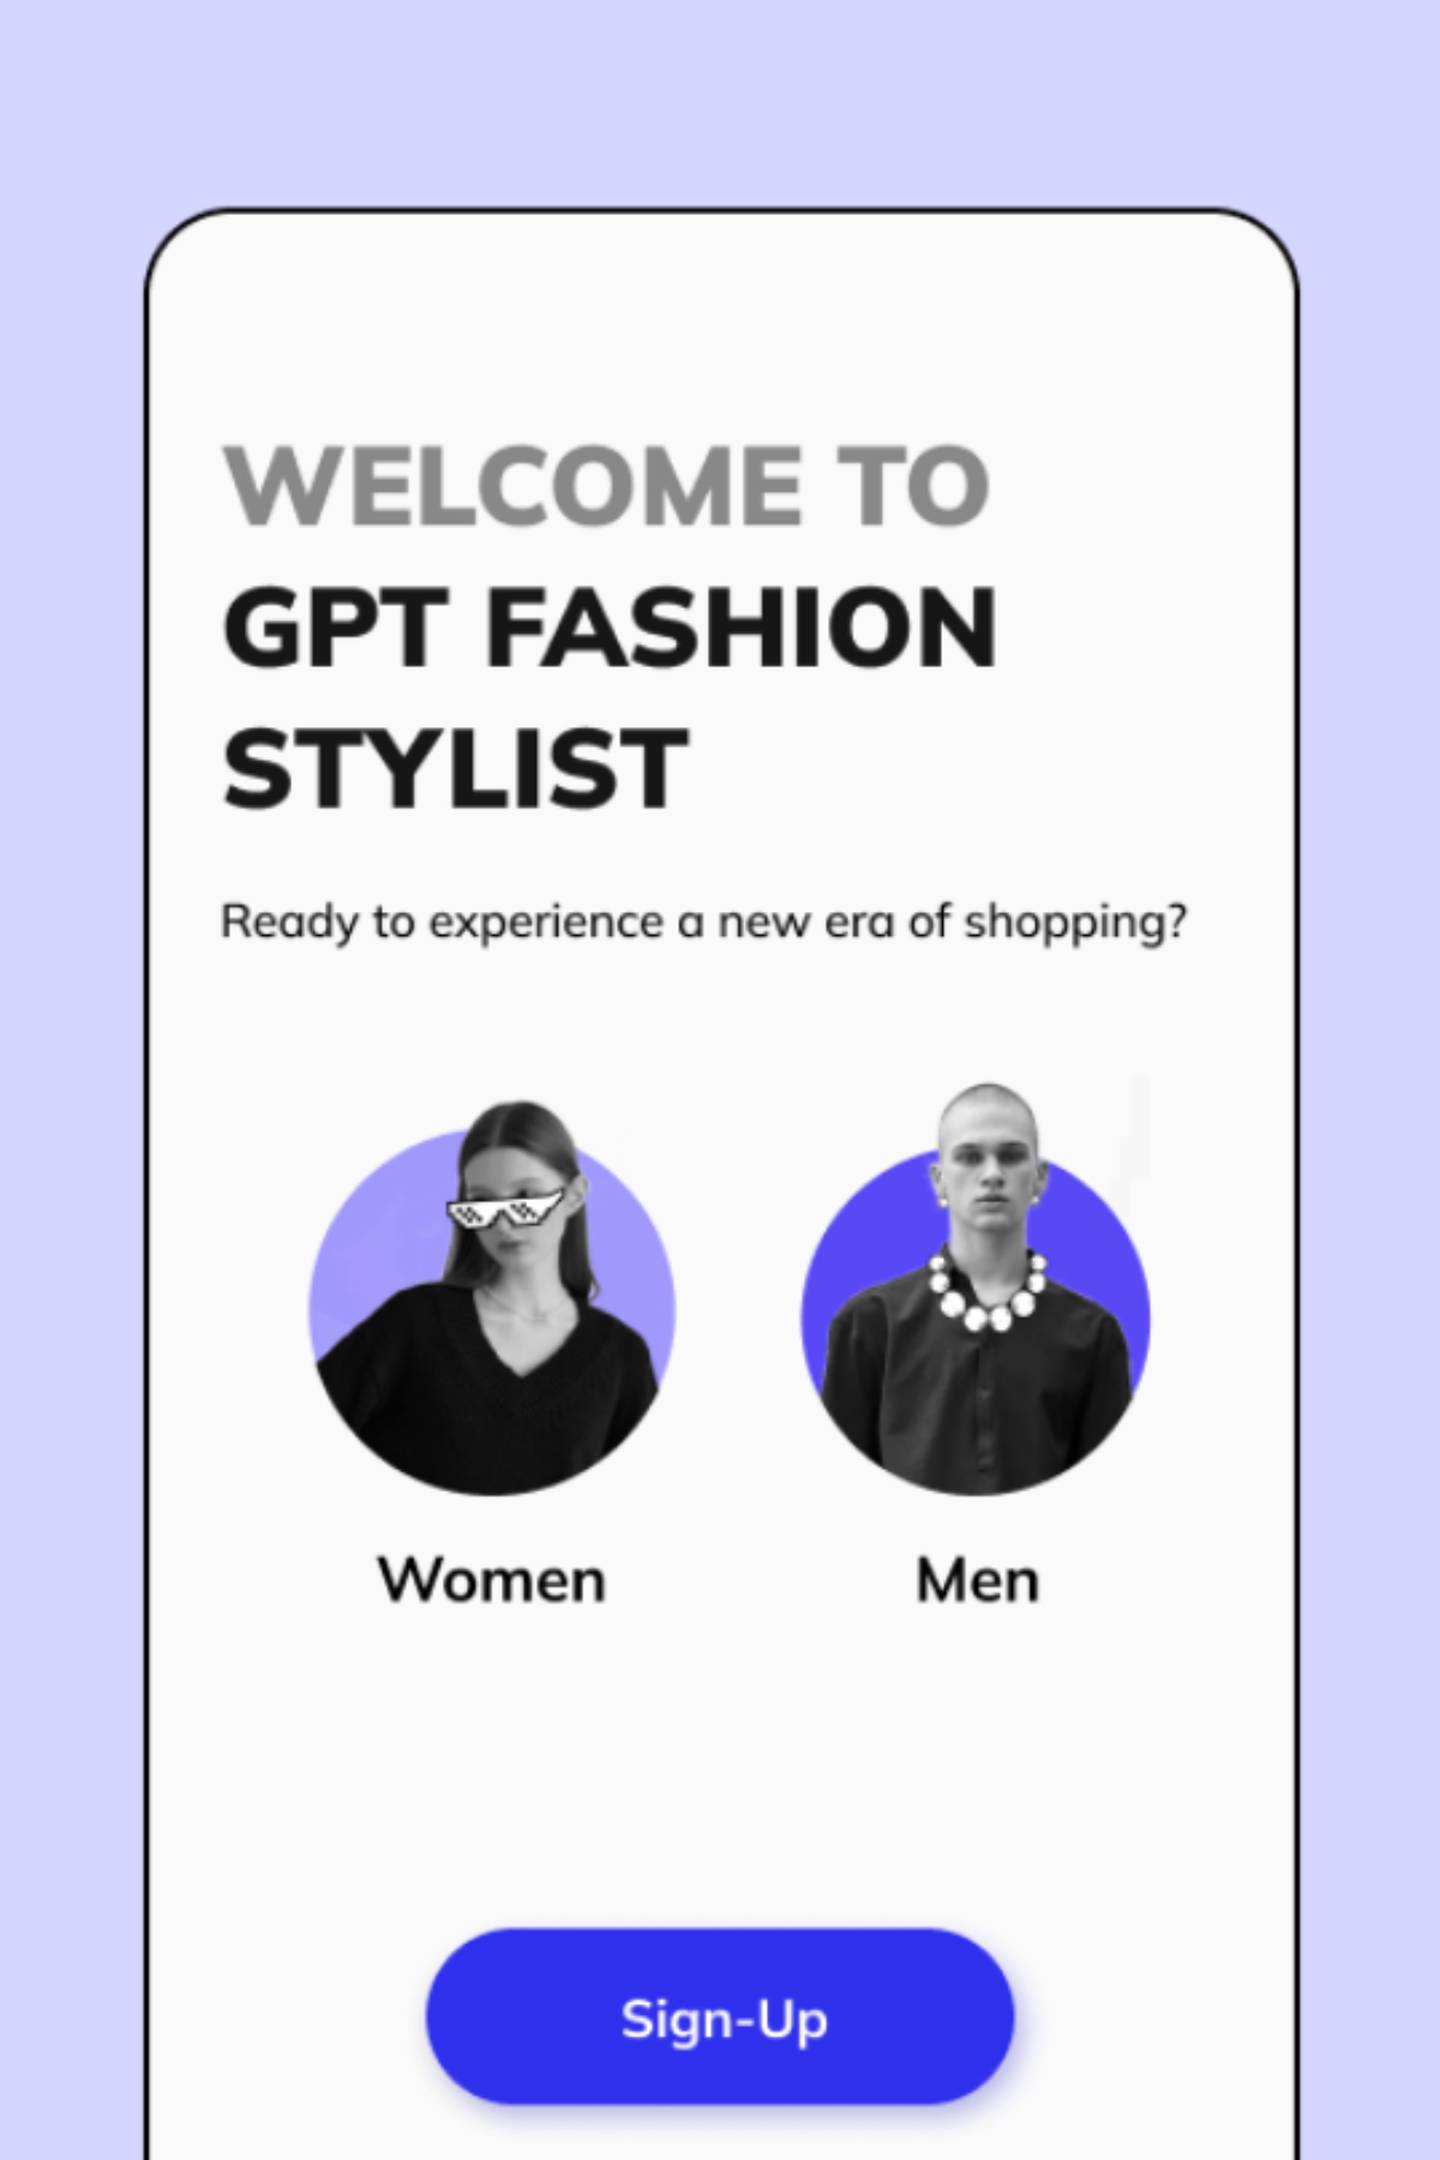 An app screen shows a picture of a man and a woman with computer-drawn accessories against a background that says "Welcome to GPT Fashion Stylist."